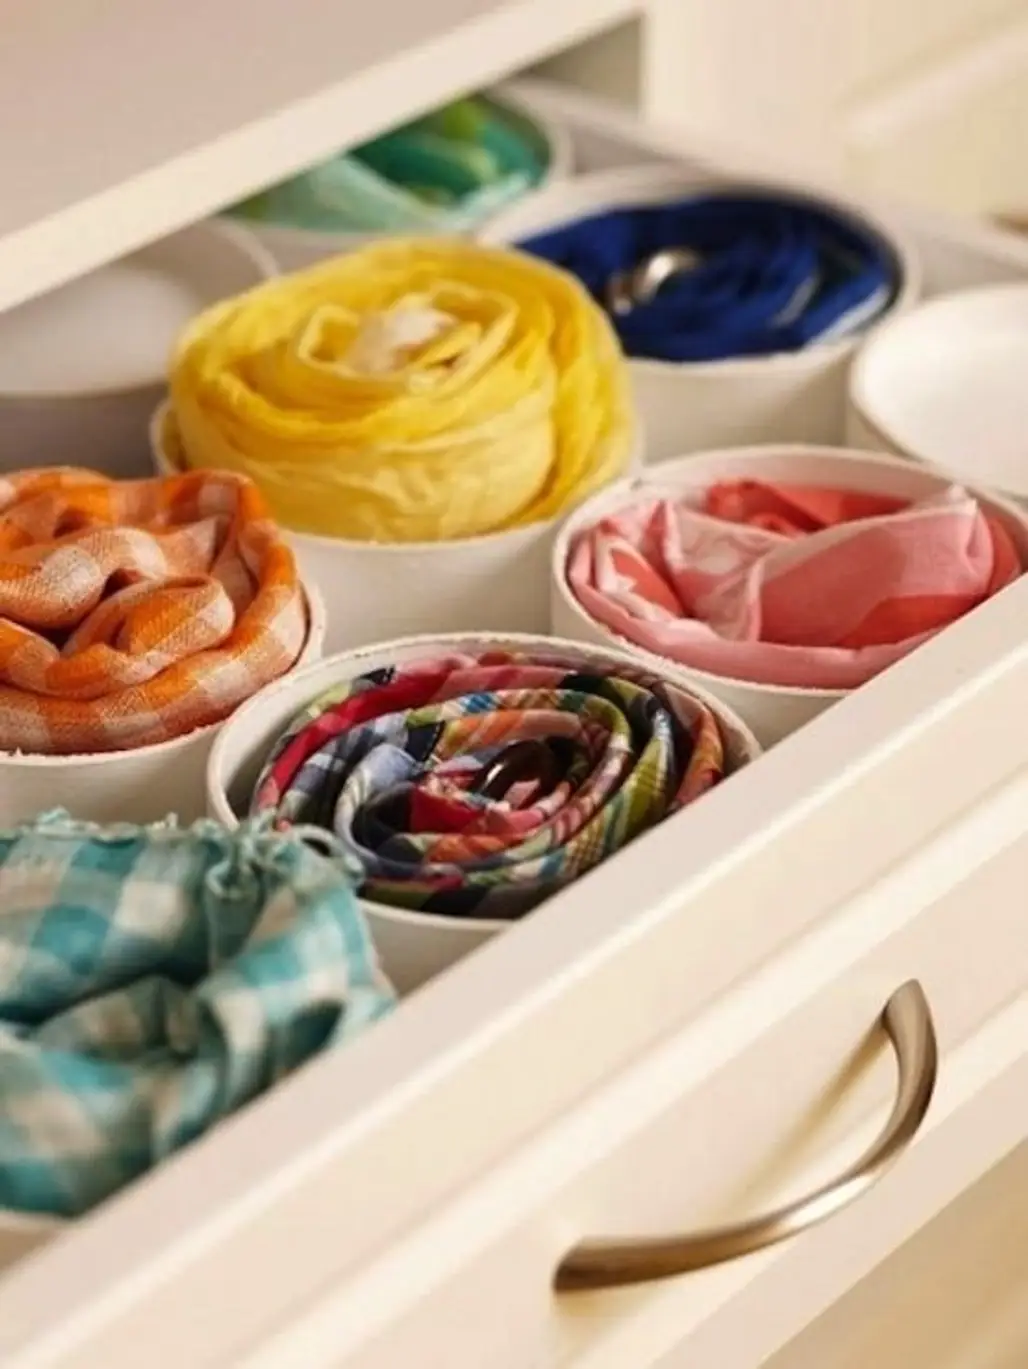 Cut PVC for Storing Scarves, Belts, or Ties